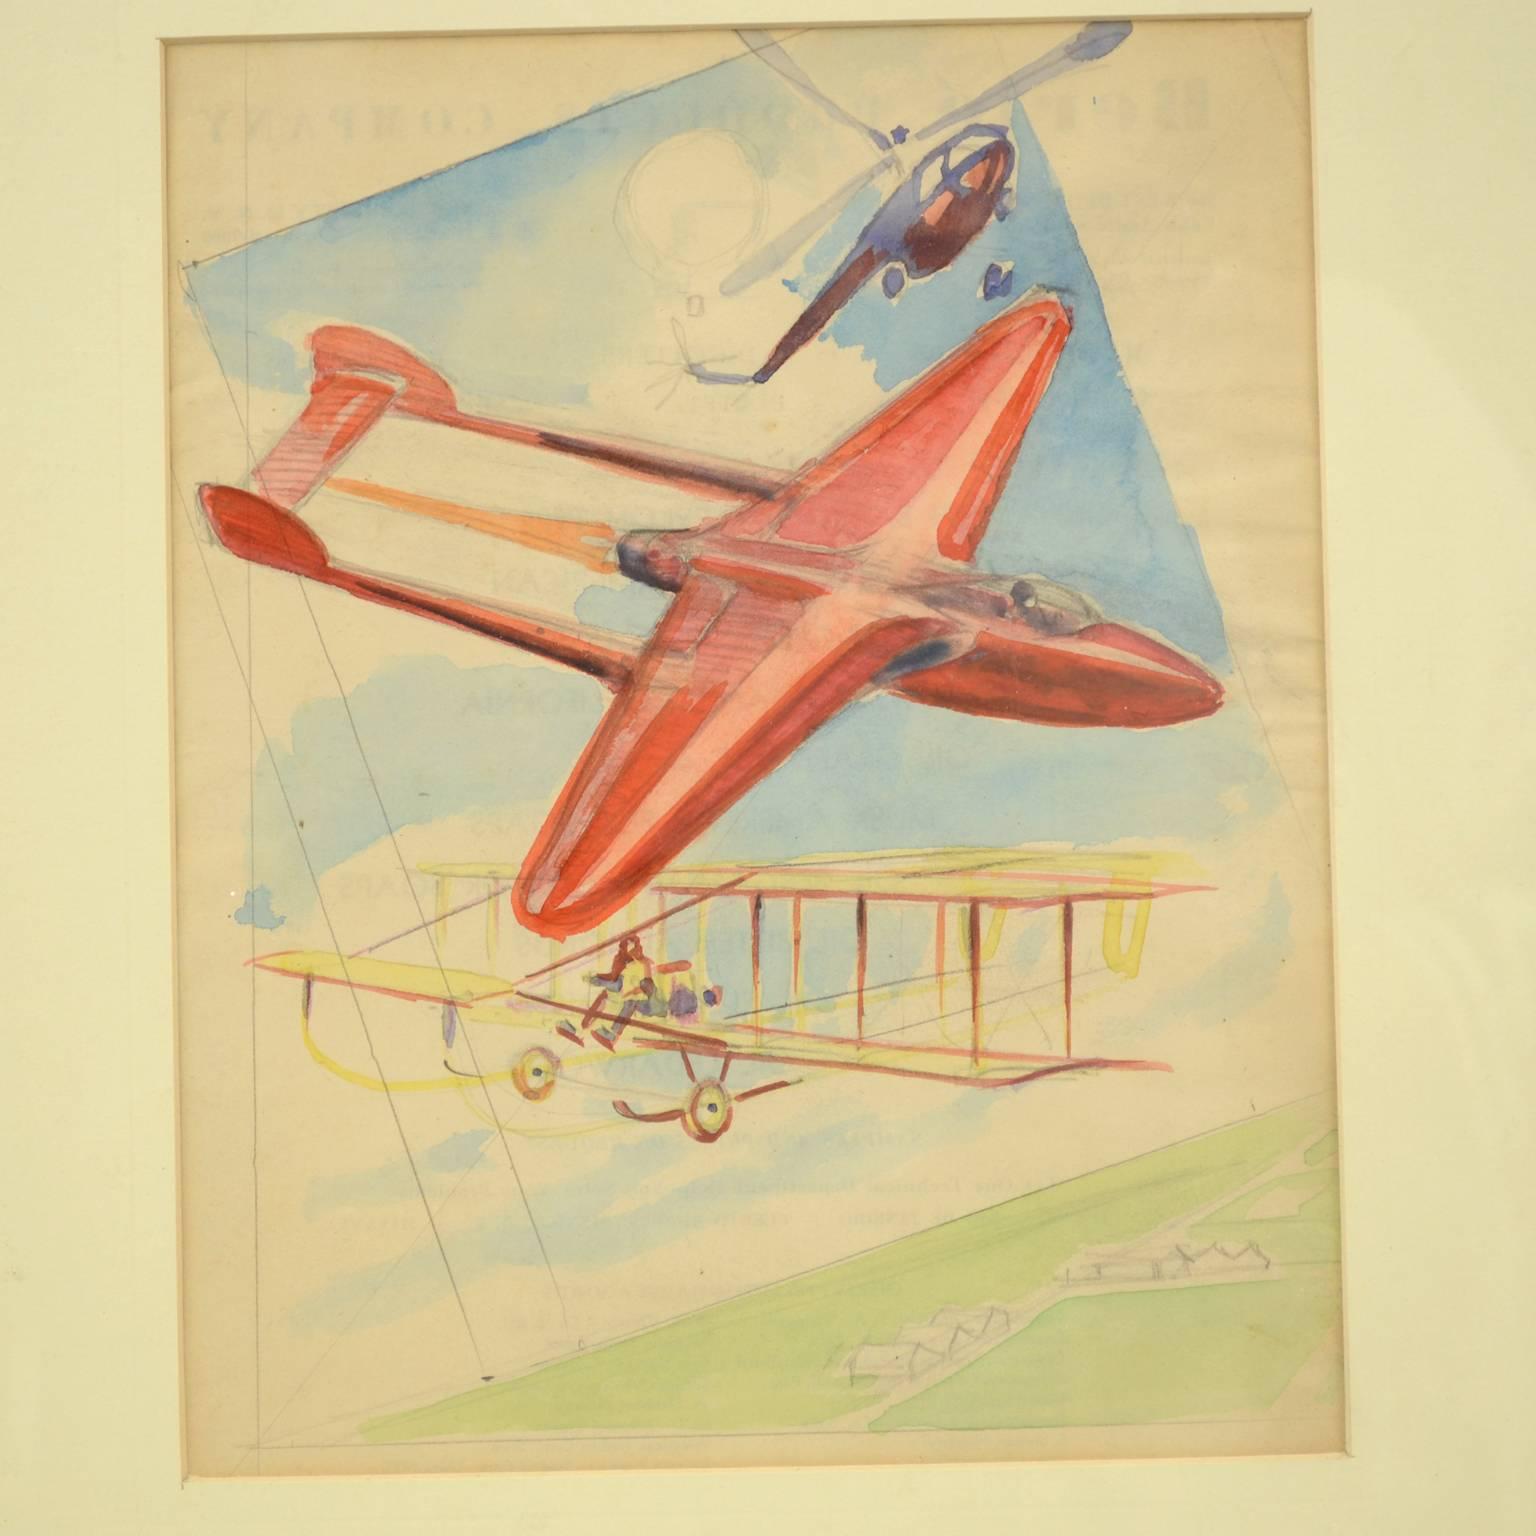 Preparatory sketch, watercolor, of a poster about the aeronautical competition Gran Premio Milano on 19th September 1948, depicting three types of flying machines, made by Riccardo Cavigioli. Including frame 38 x 1.7 x 43 cm - 14.96 x 0.66 x 16.9